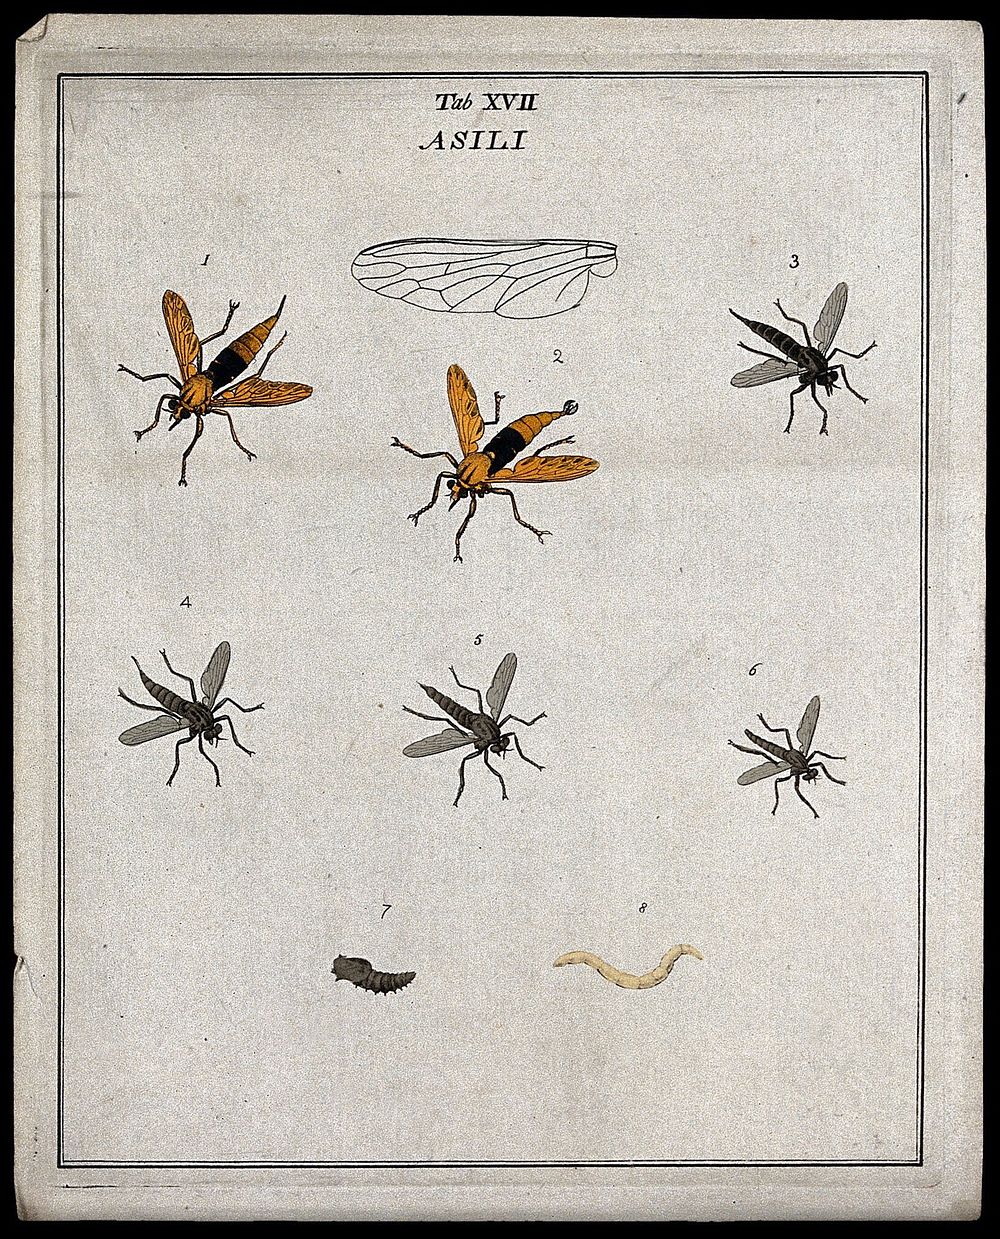 Six robber flies (Asilidæ species): adults, a larva and pupa. Coloured etching by M. Harris, ca. 1766.